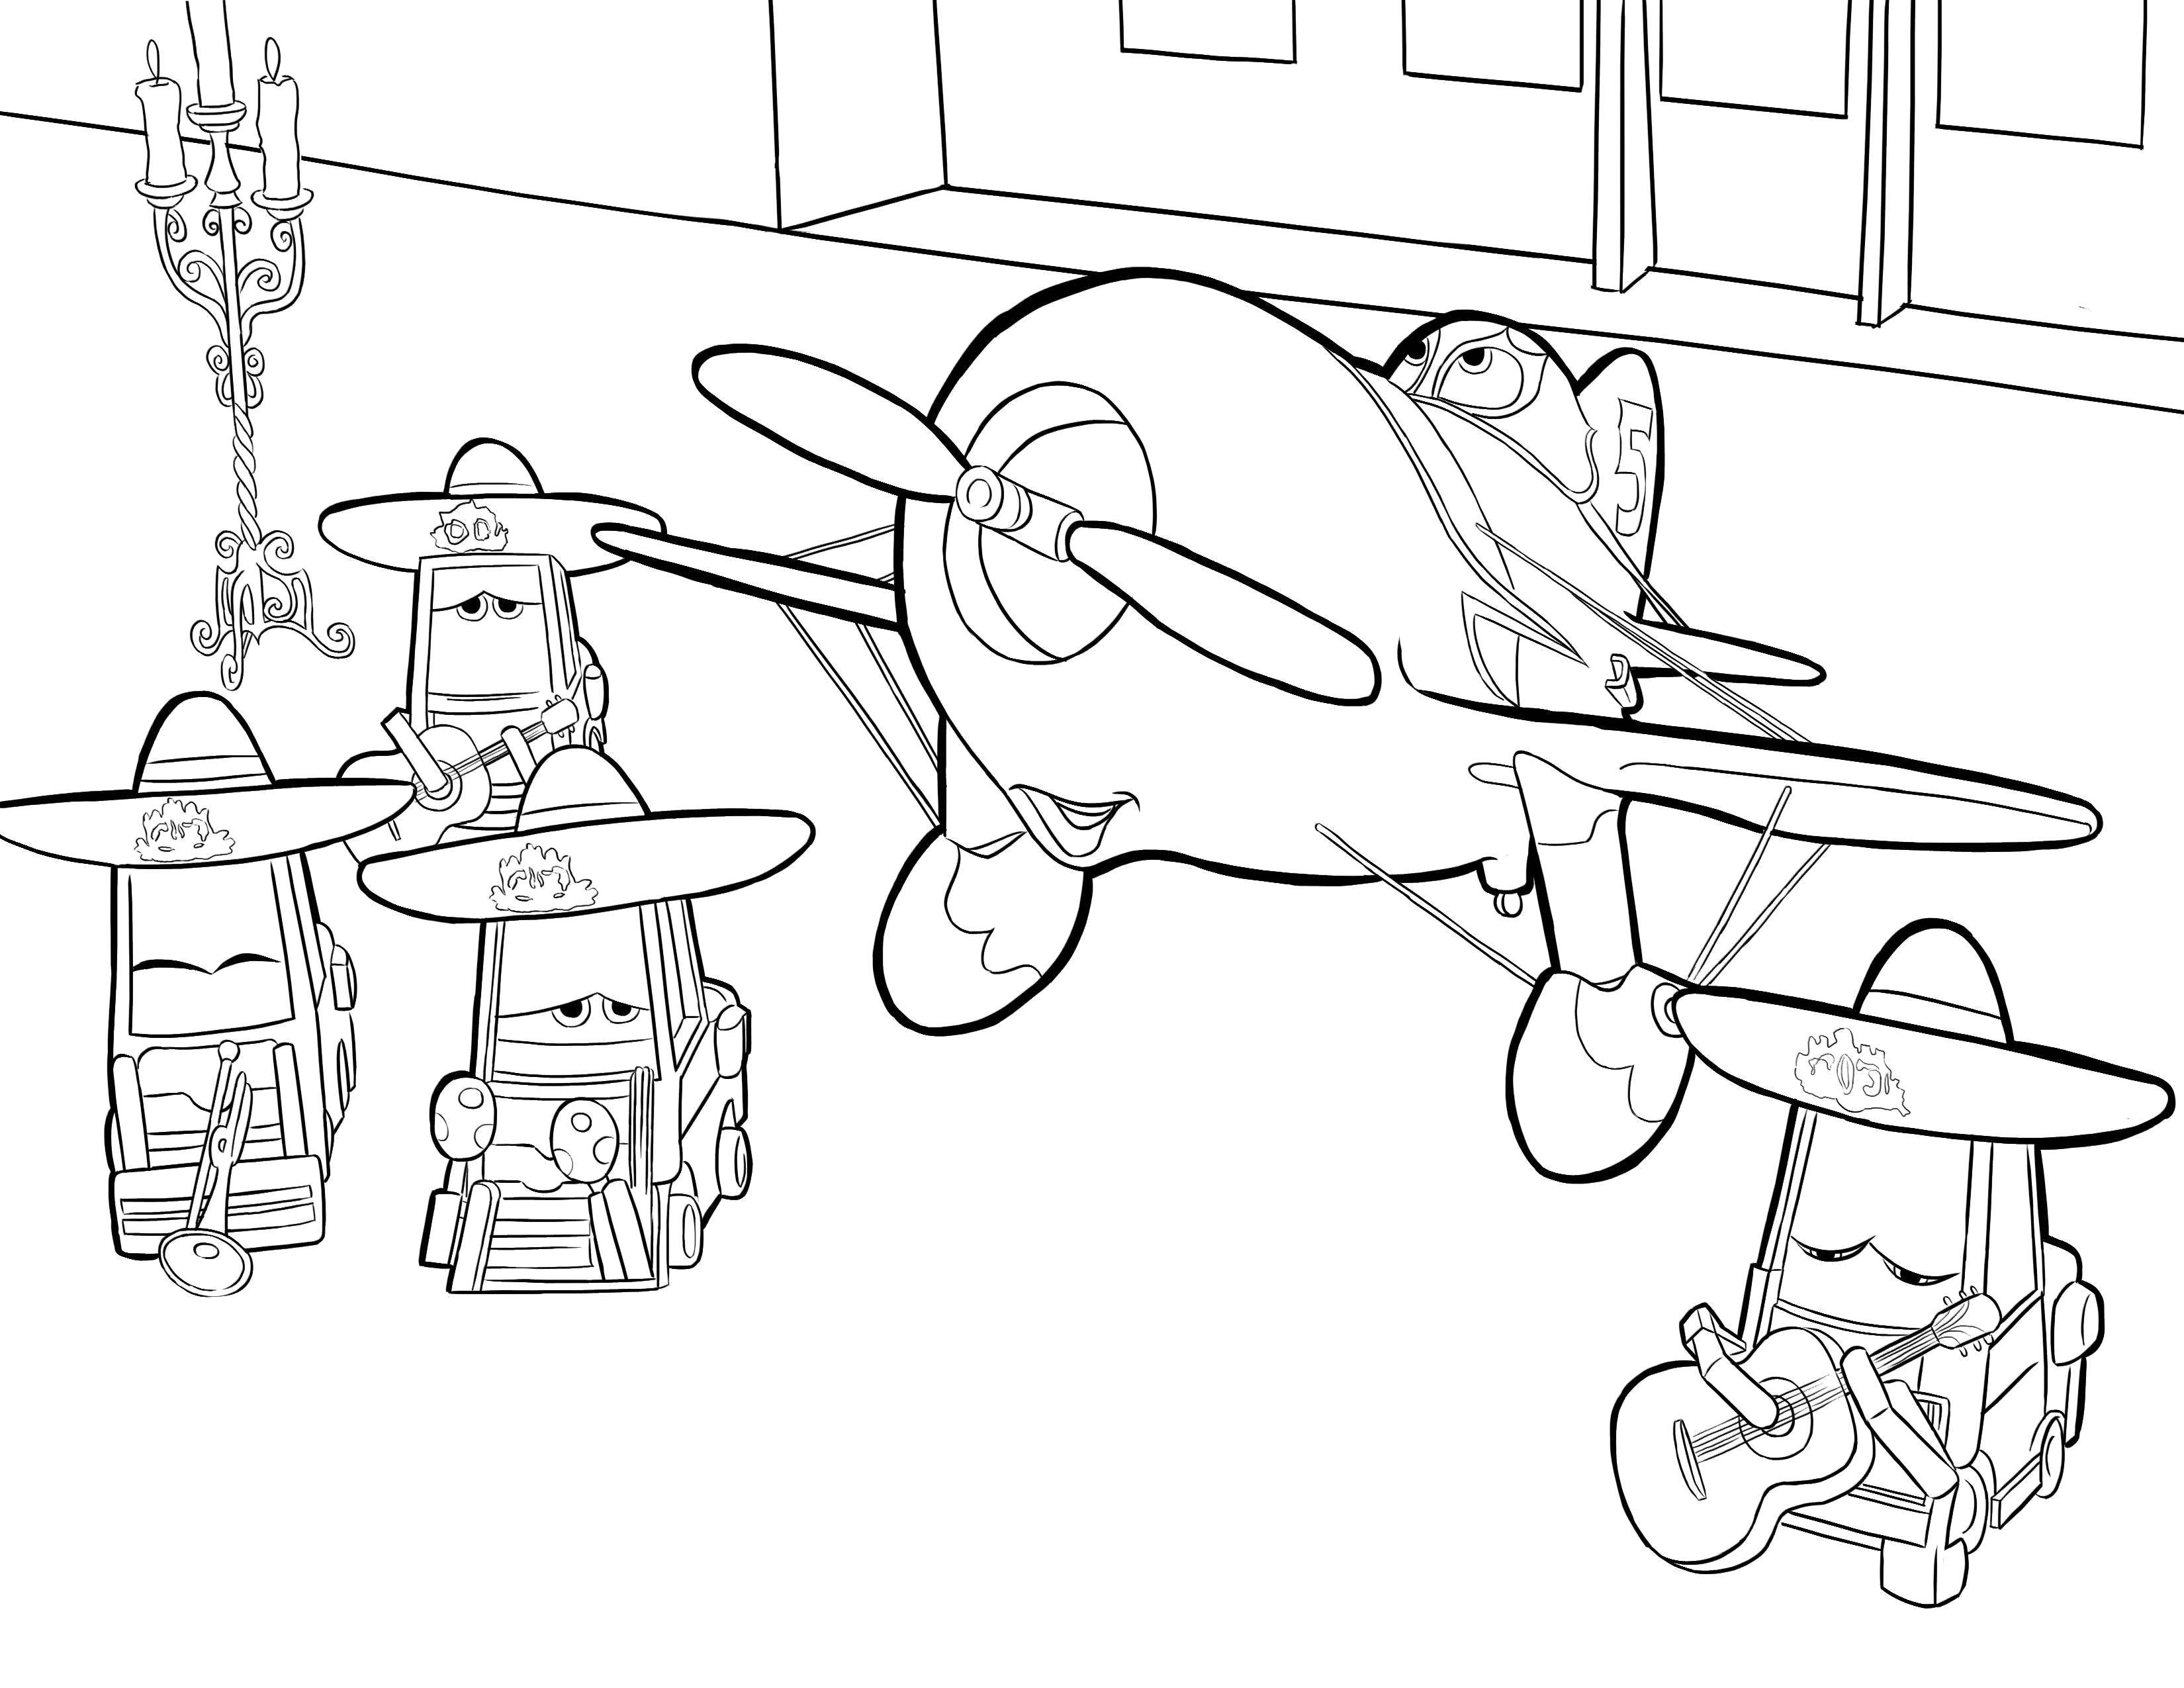 Coloring Cartoon character. Category The planes. Tags:  Cartoon character.